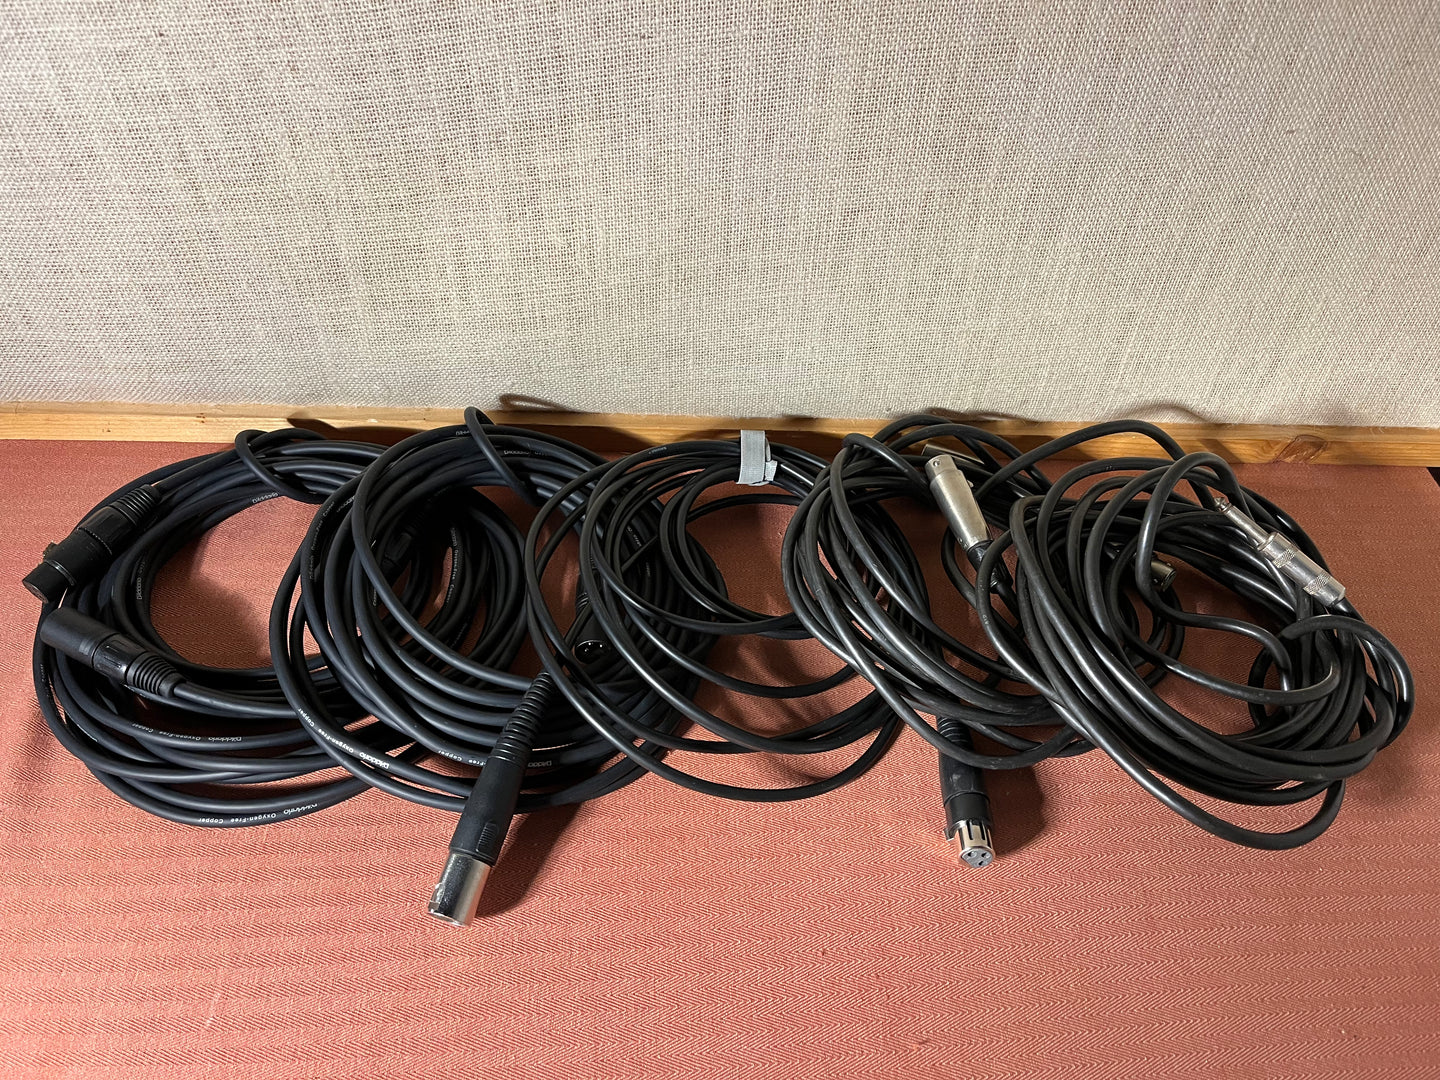 Assorted 20’ XLR Cables (5)